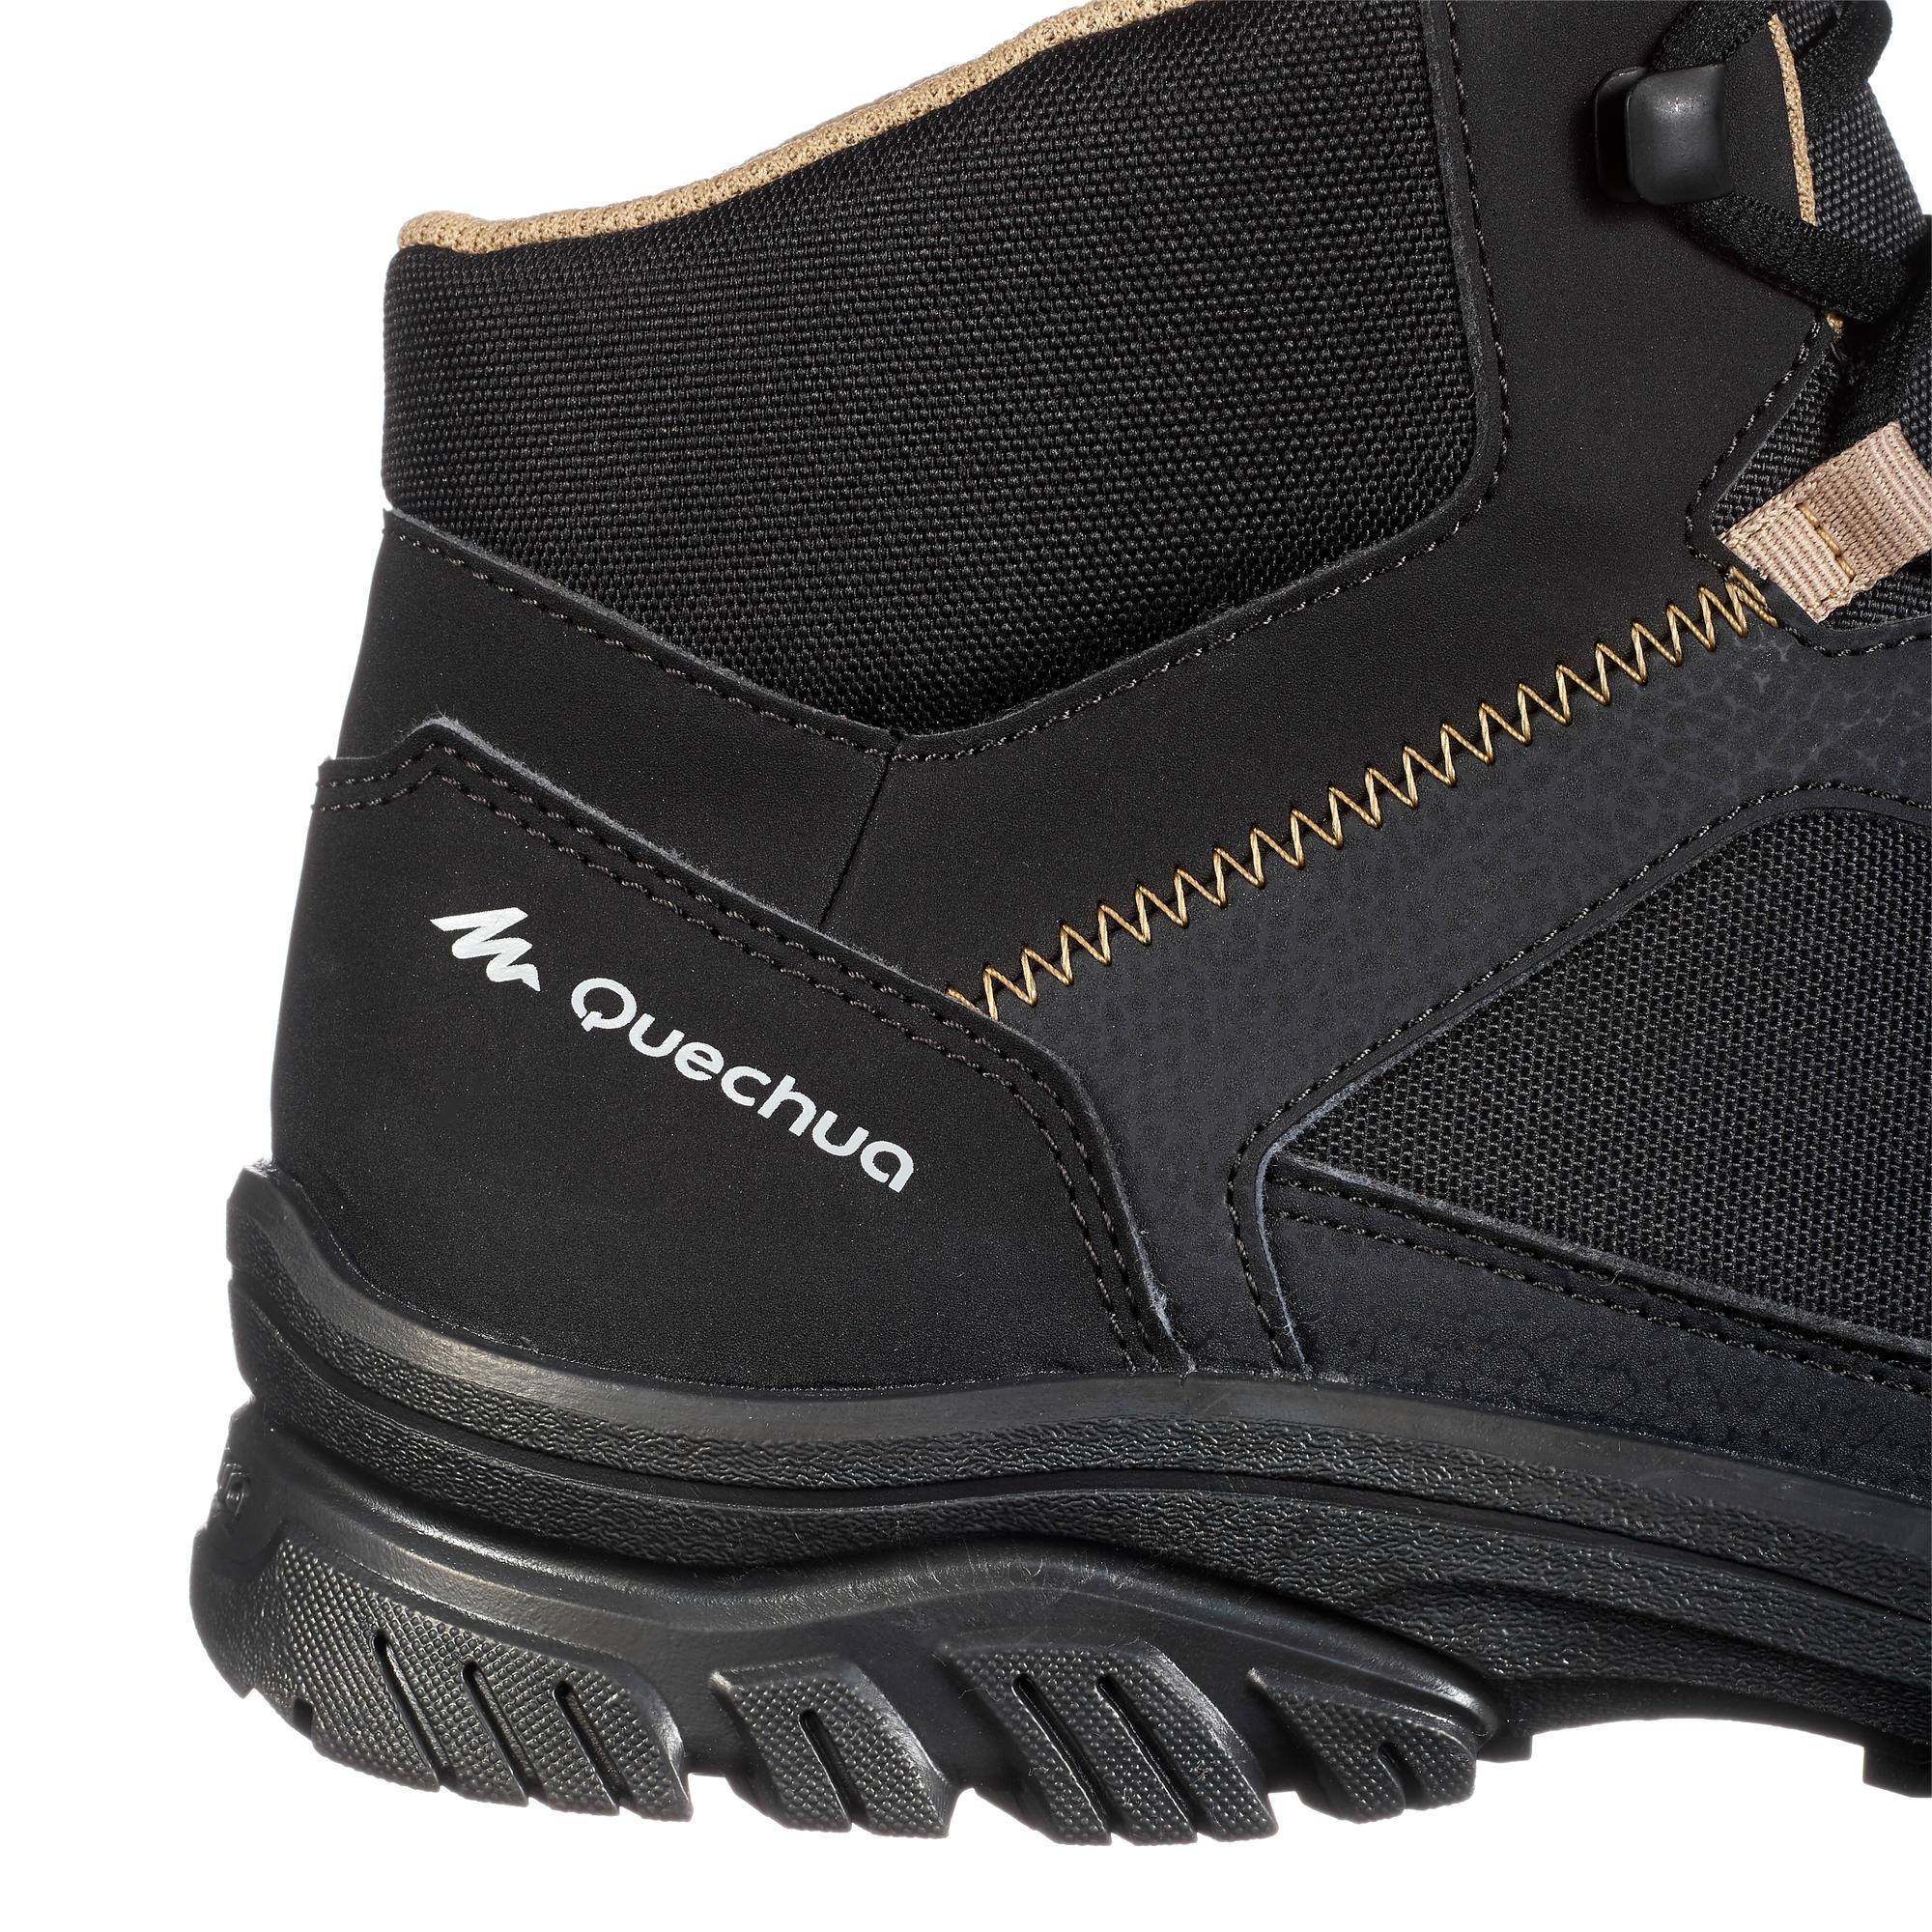 Men's Country walking boots – NH100 Mid 